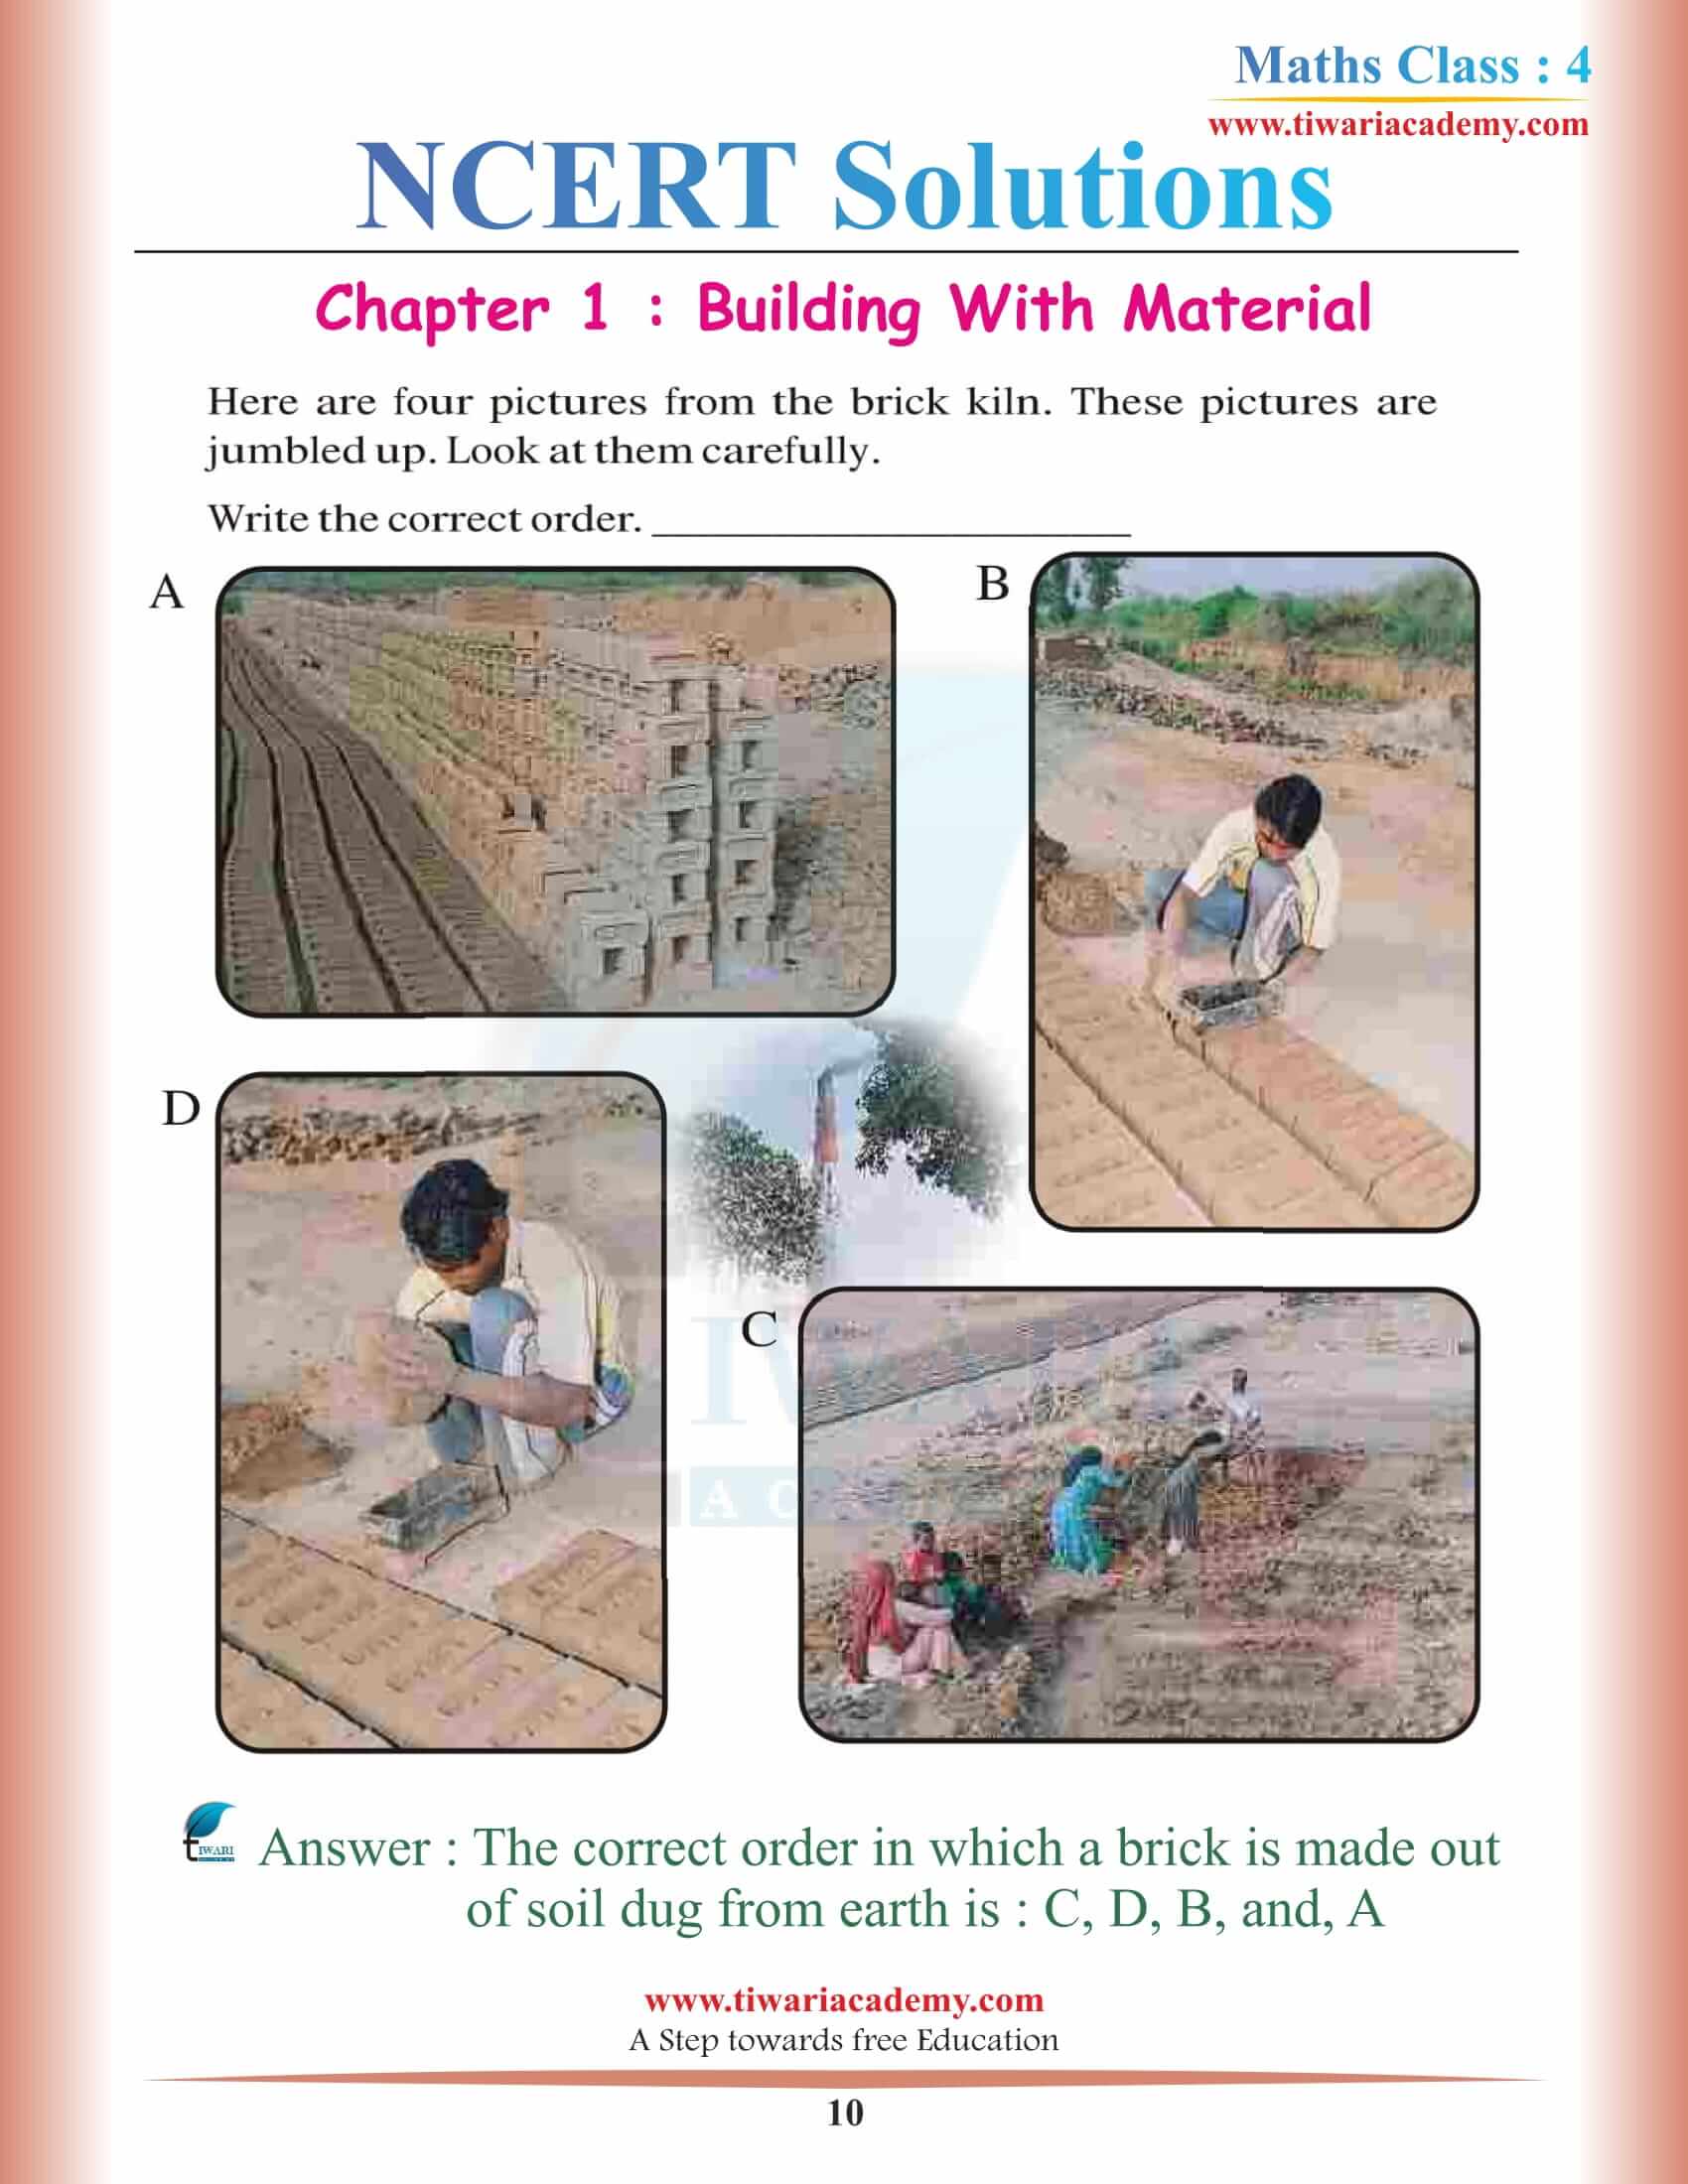 Class 4 Maths NCERT Chapter 1 Solutions in PDF